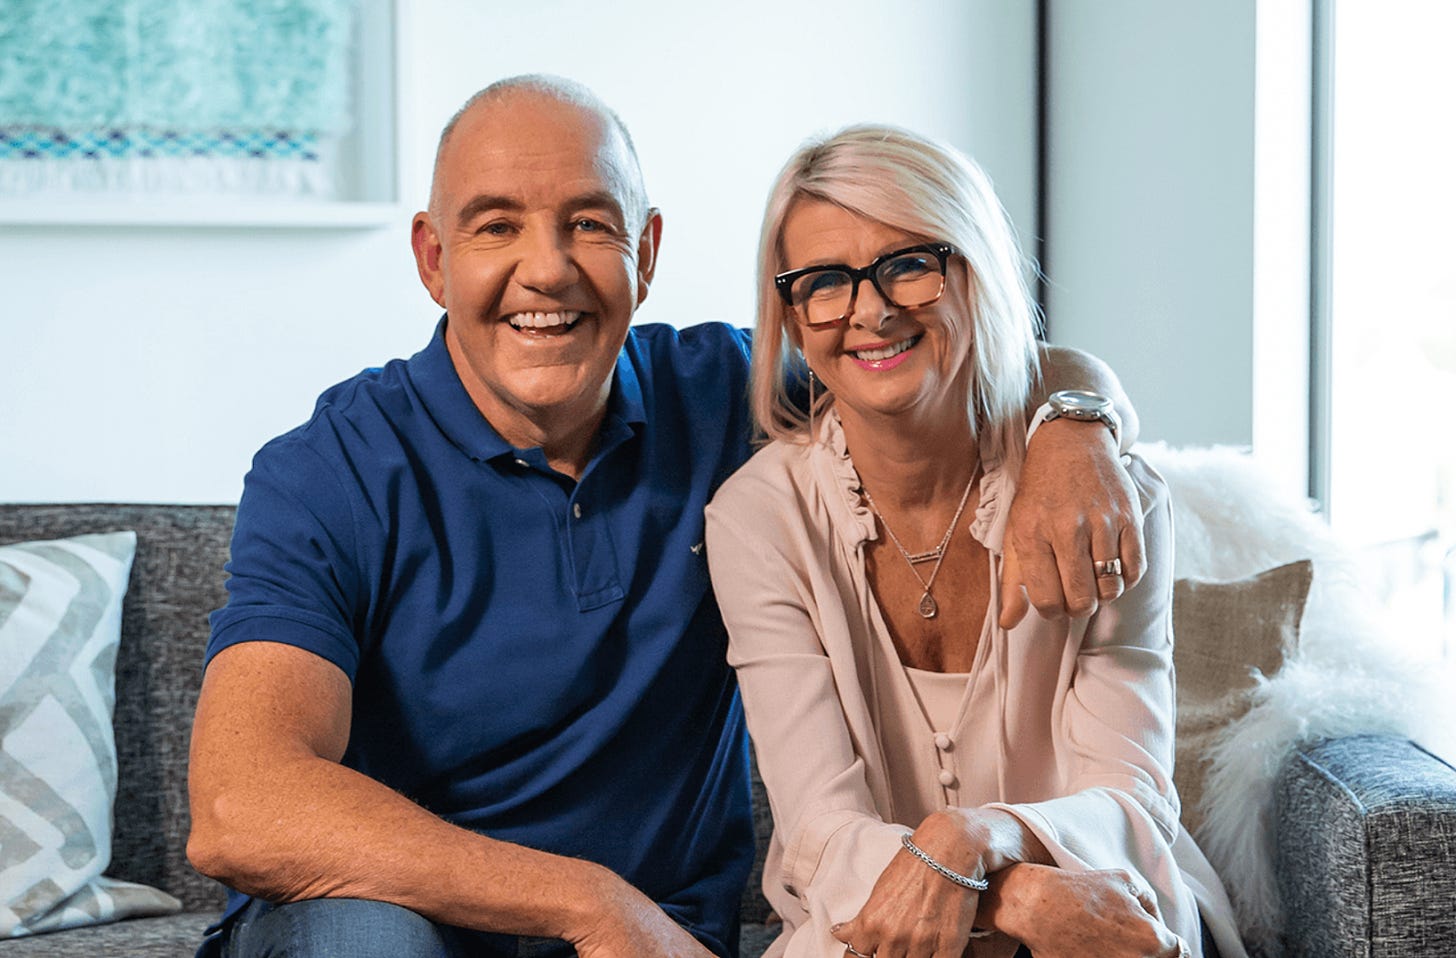 Life founders Paul & Maree de Jong on the couch